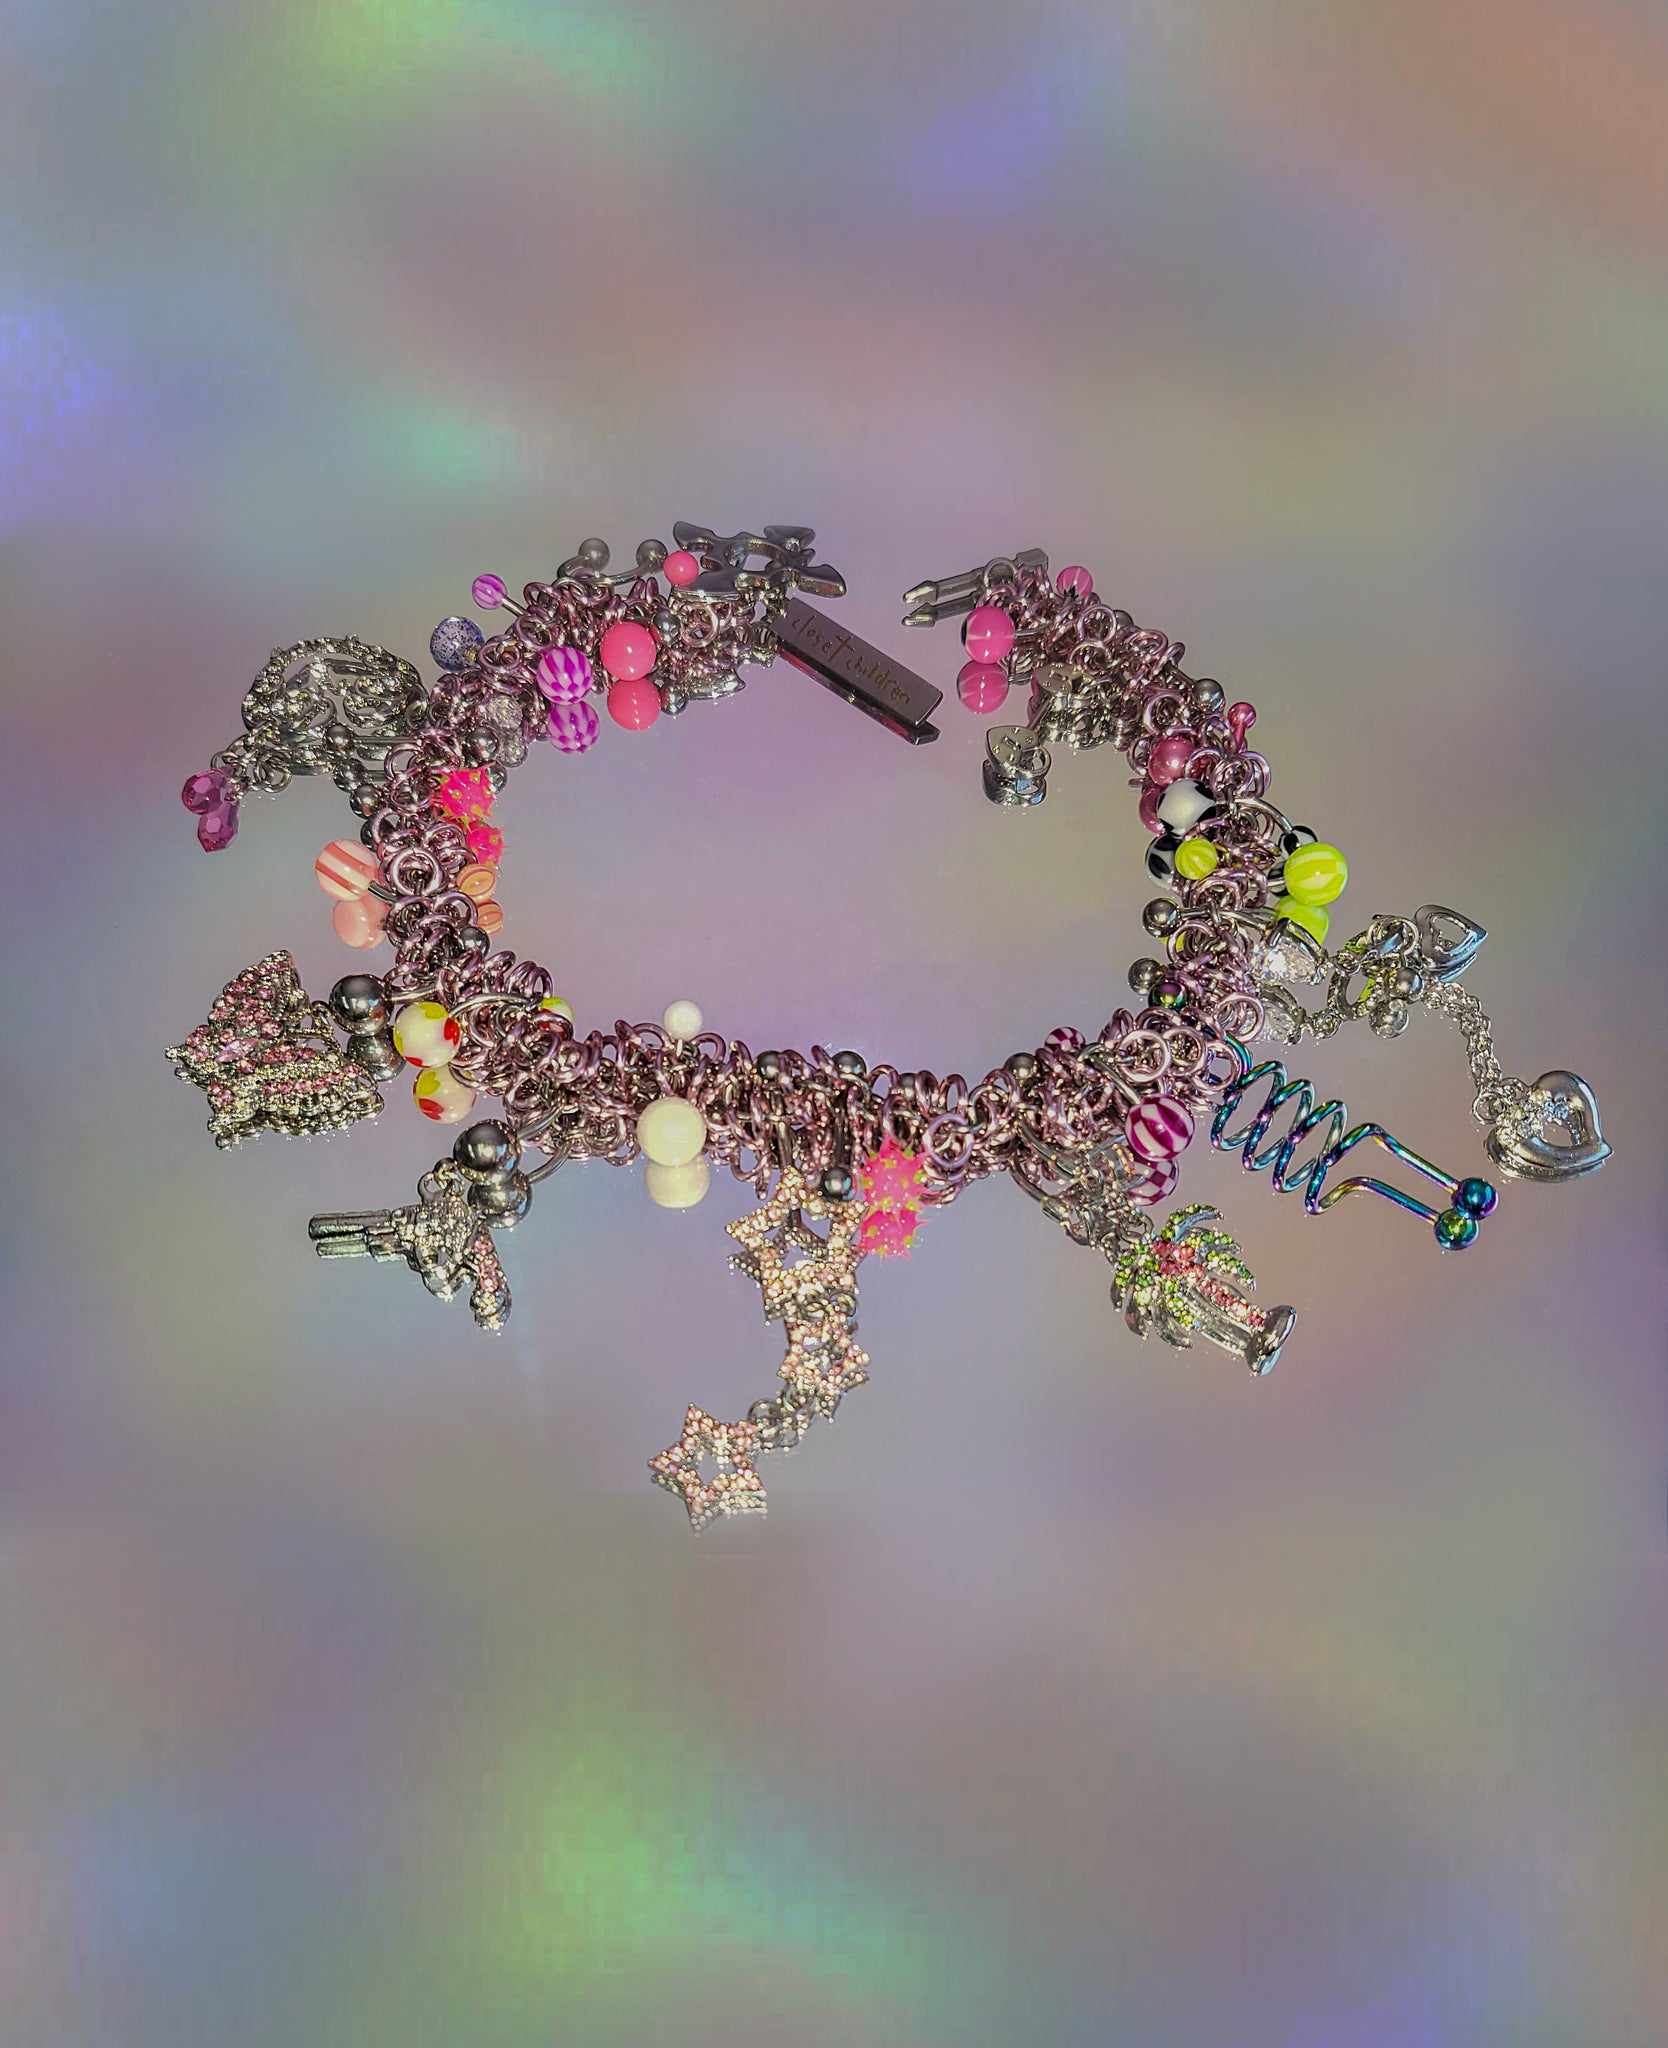 SPECIAL MAGA CHARM CHOKER IN PINK AND PURPLES